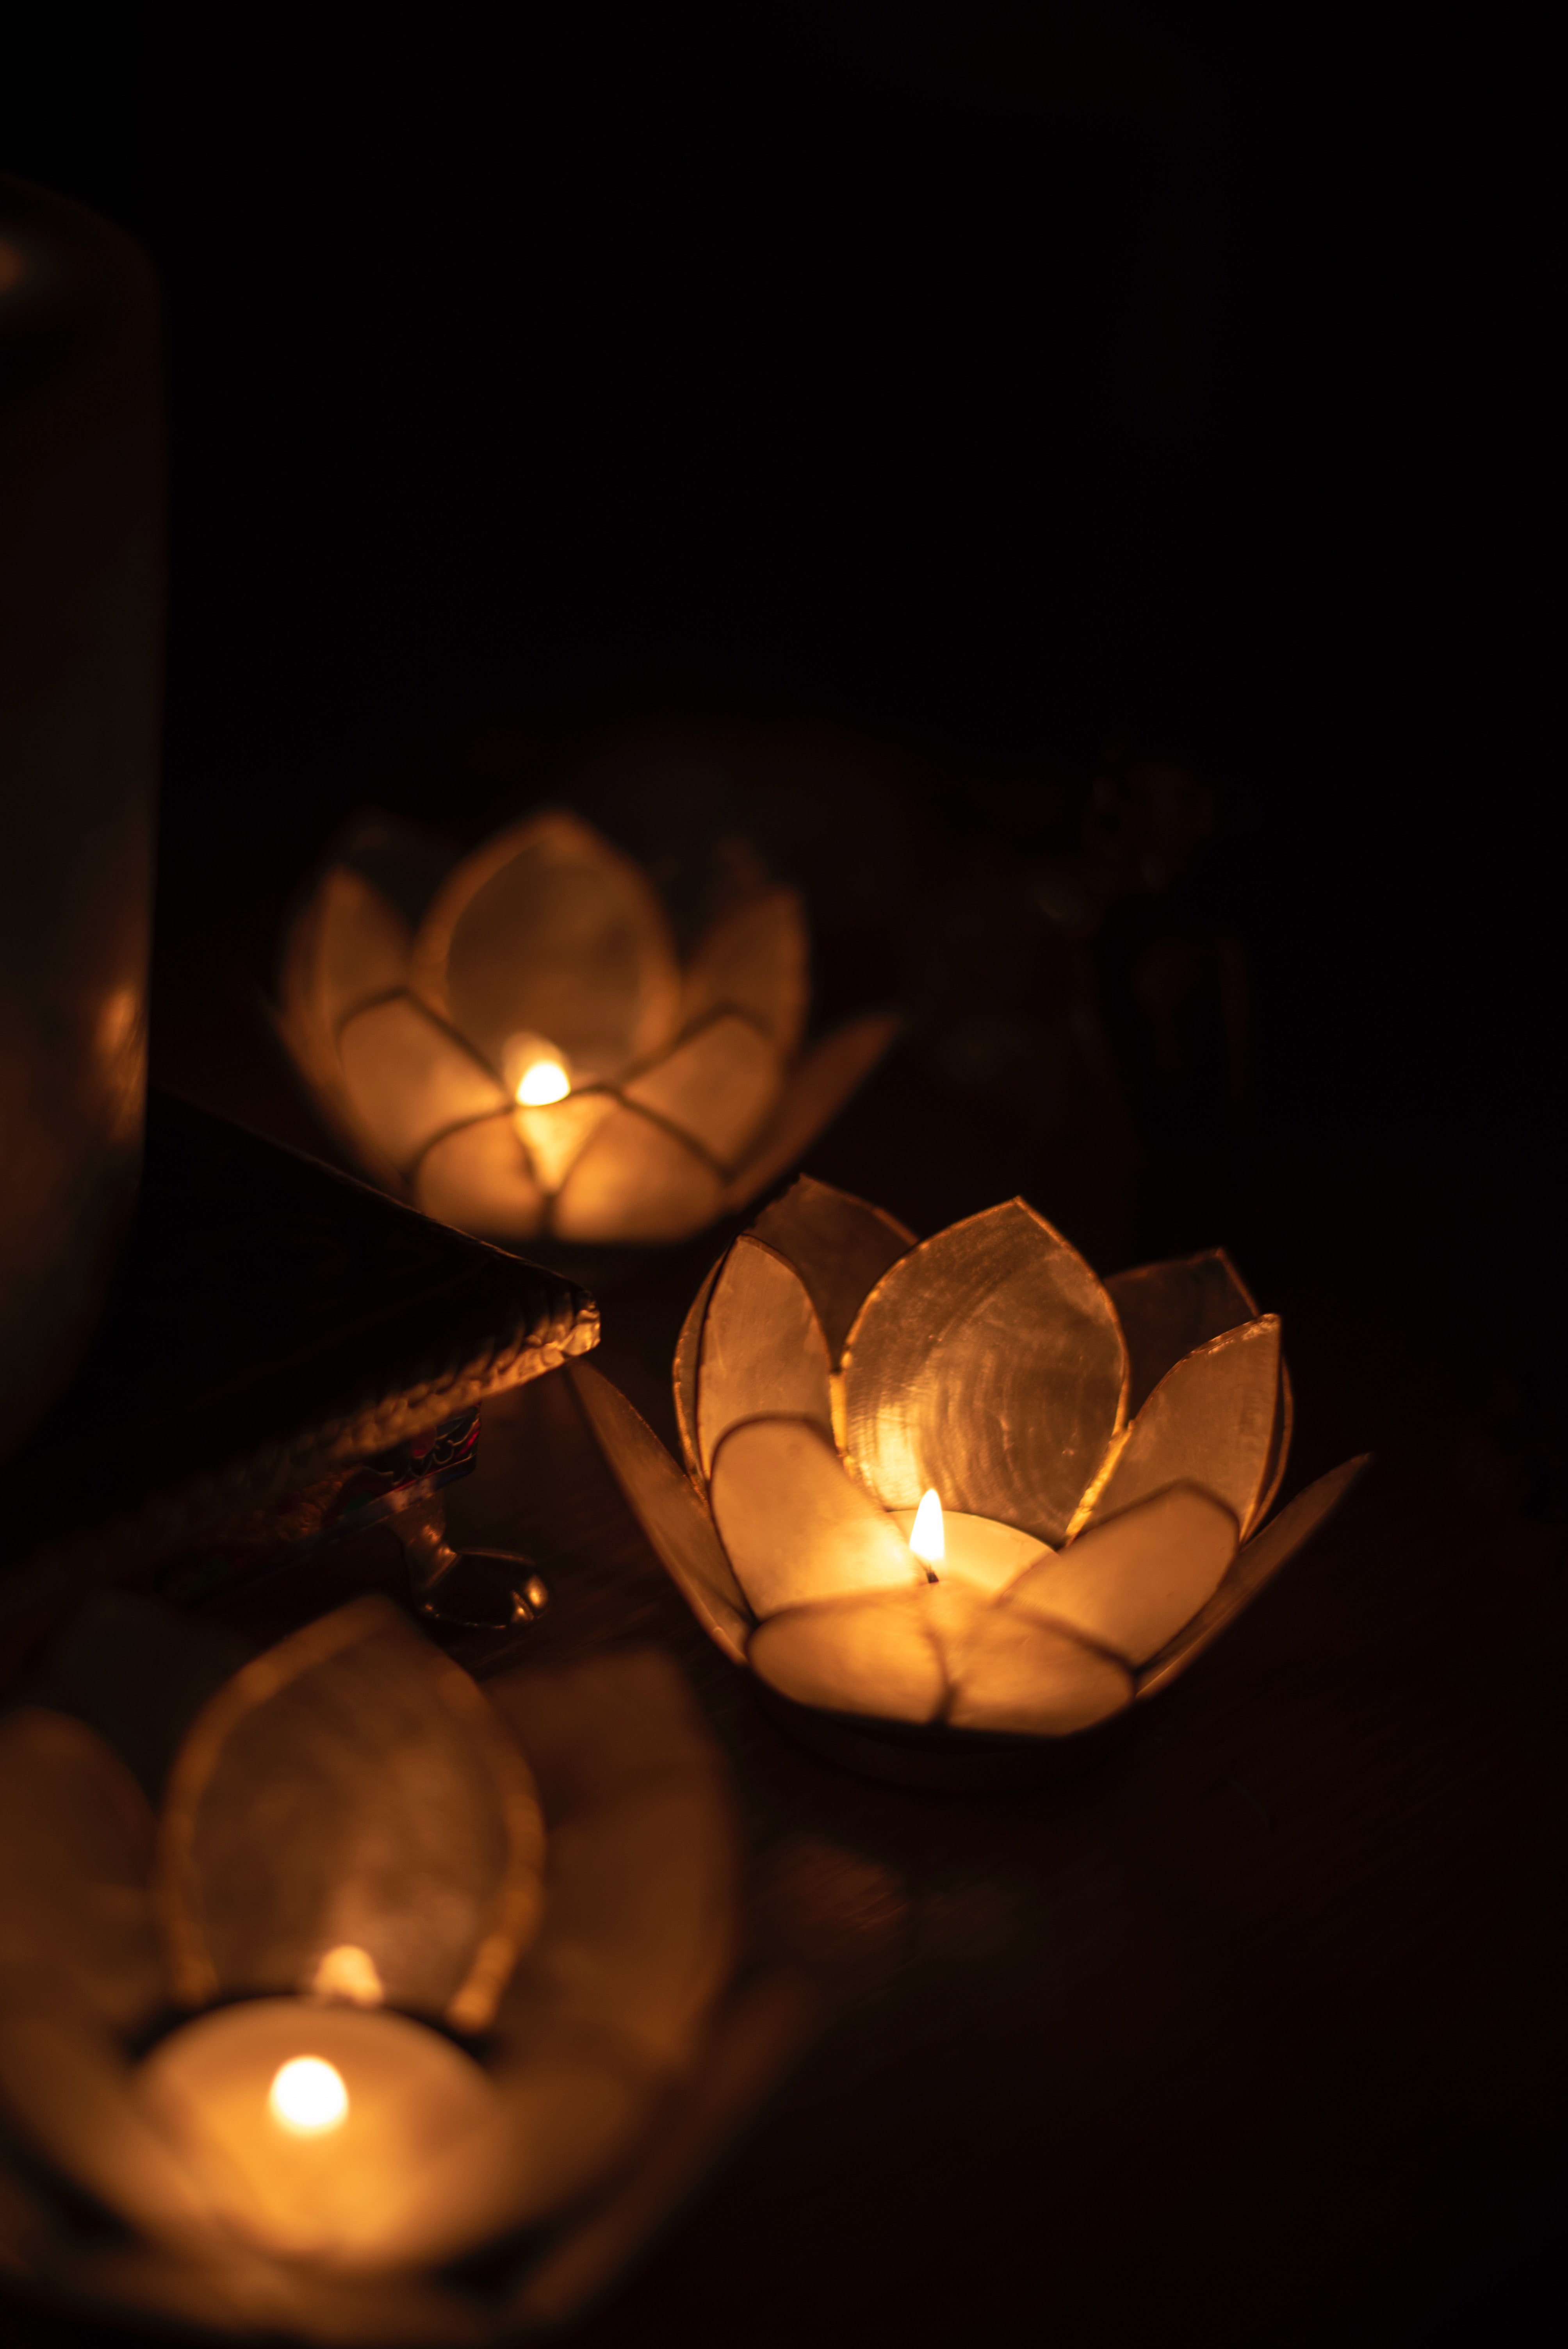 3 lotus-flower shaped candles in the dark